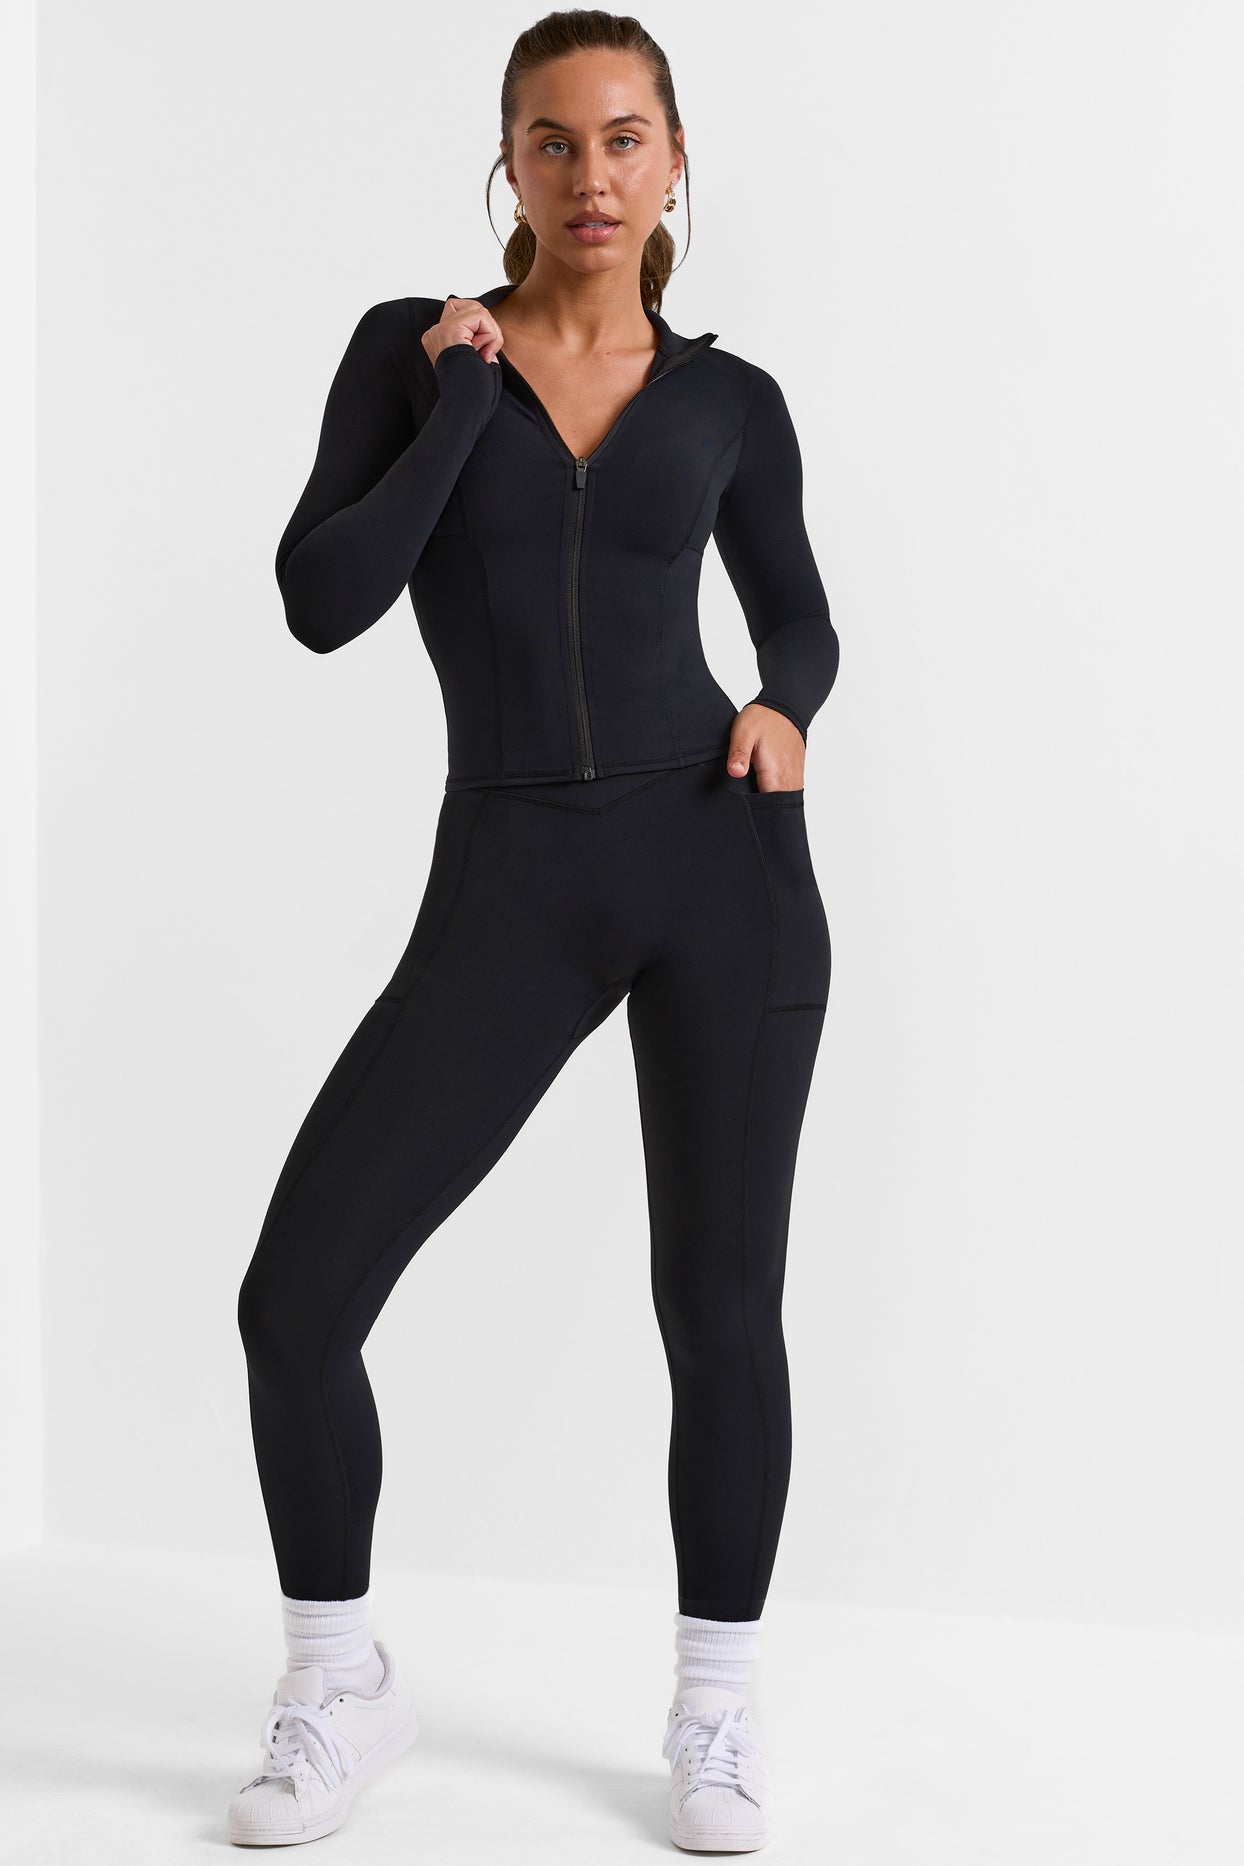 Pants & Jumpsuits, Black Athletic Leggings With 2 Side Pockets